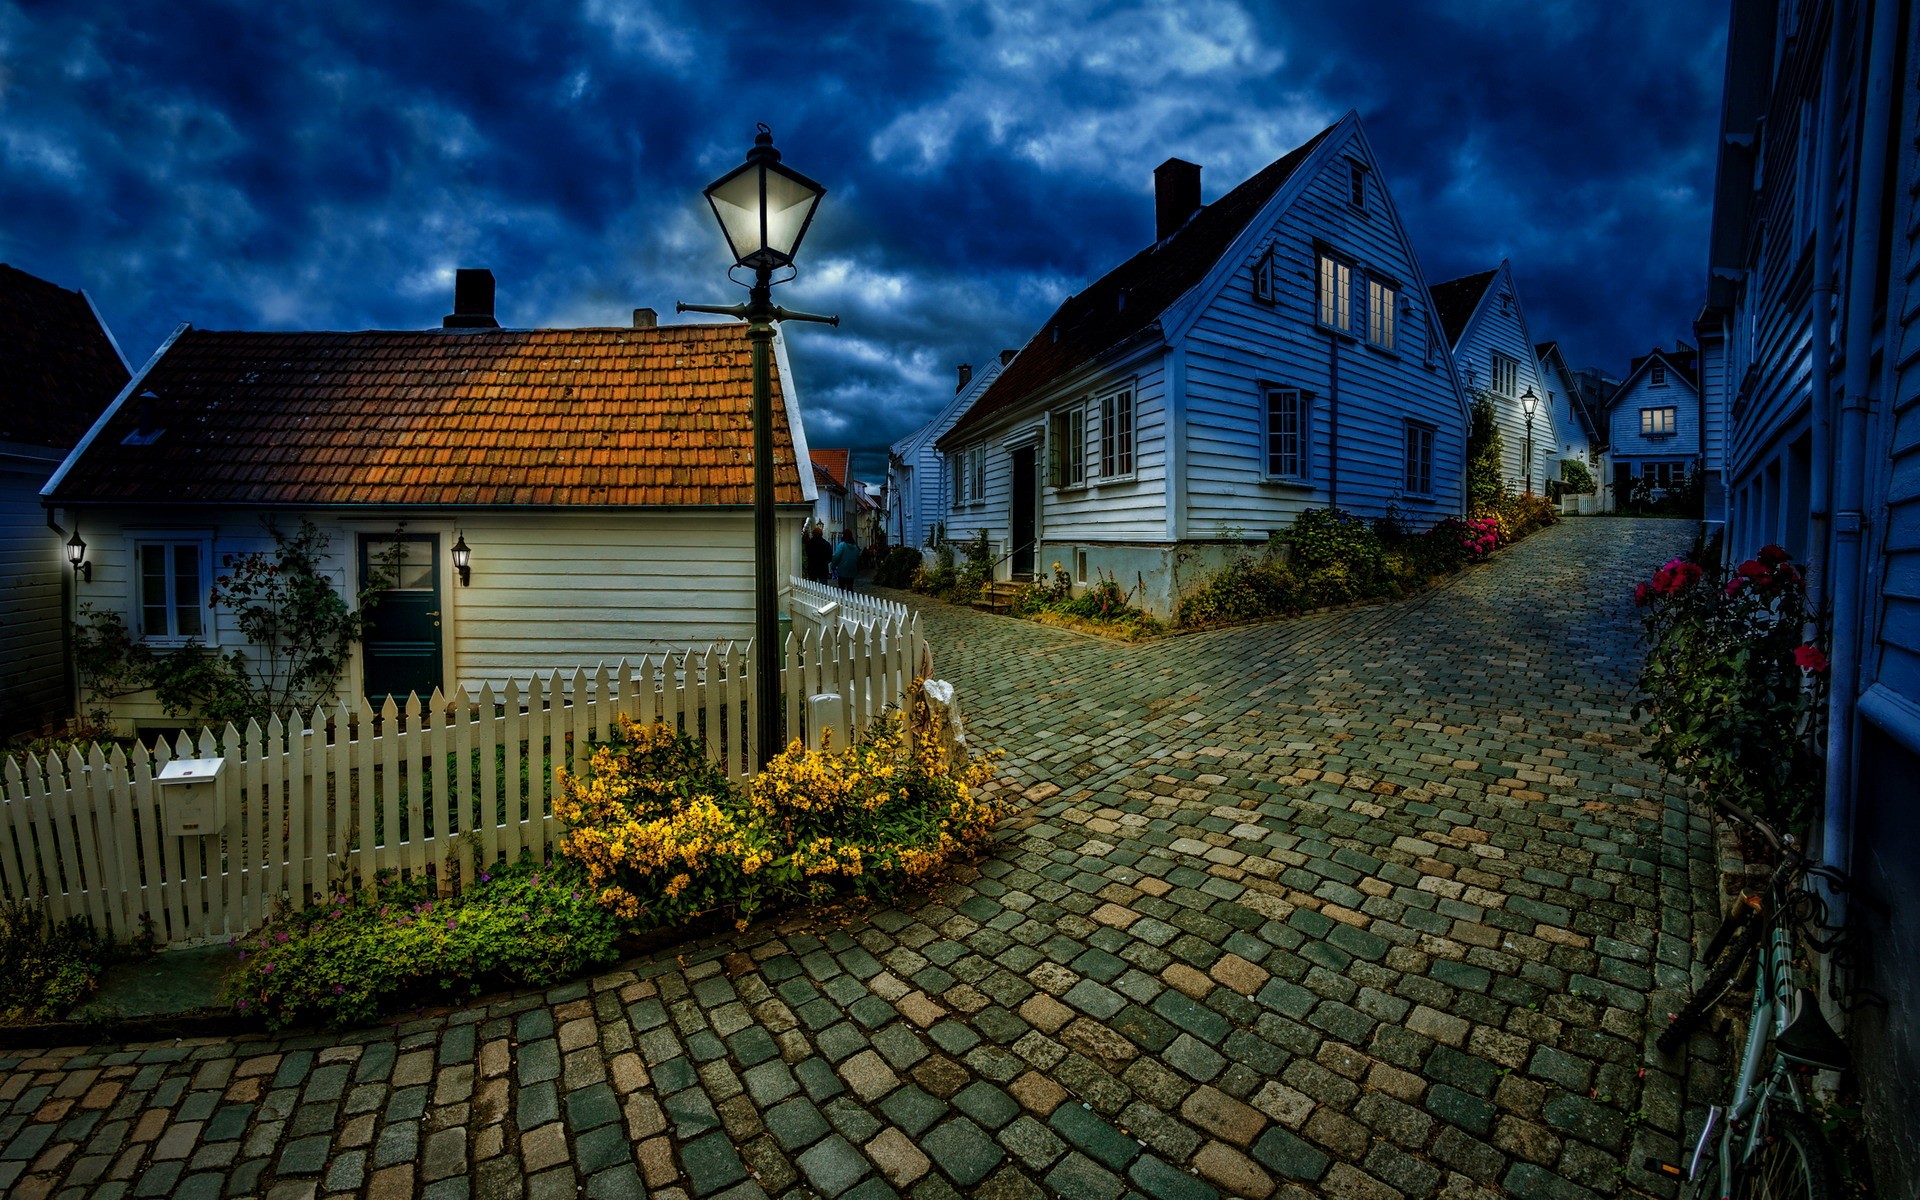 architecture building nature norway house night street village street light hills clouds fence wallpaper. Mocah HD Wallpaper